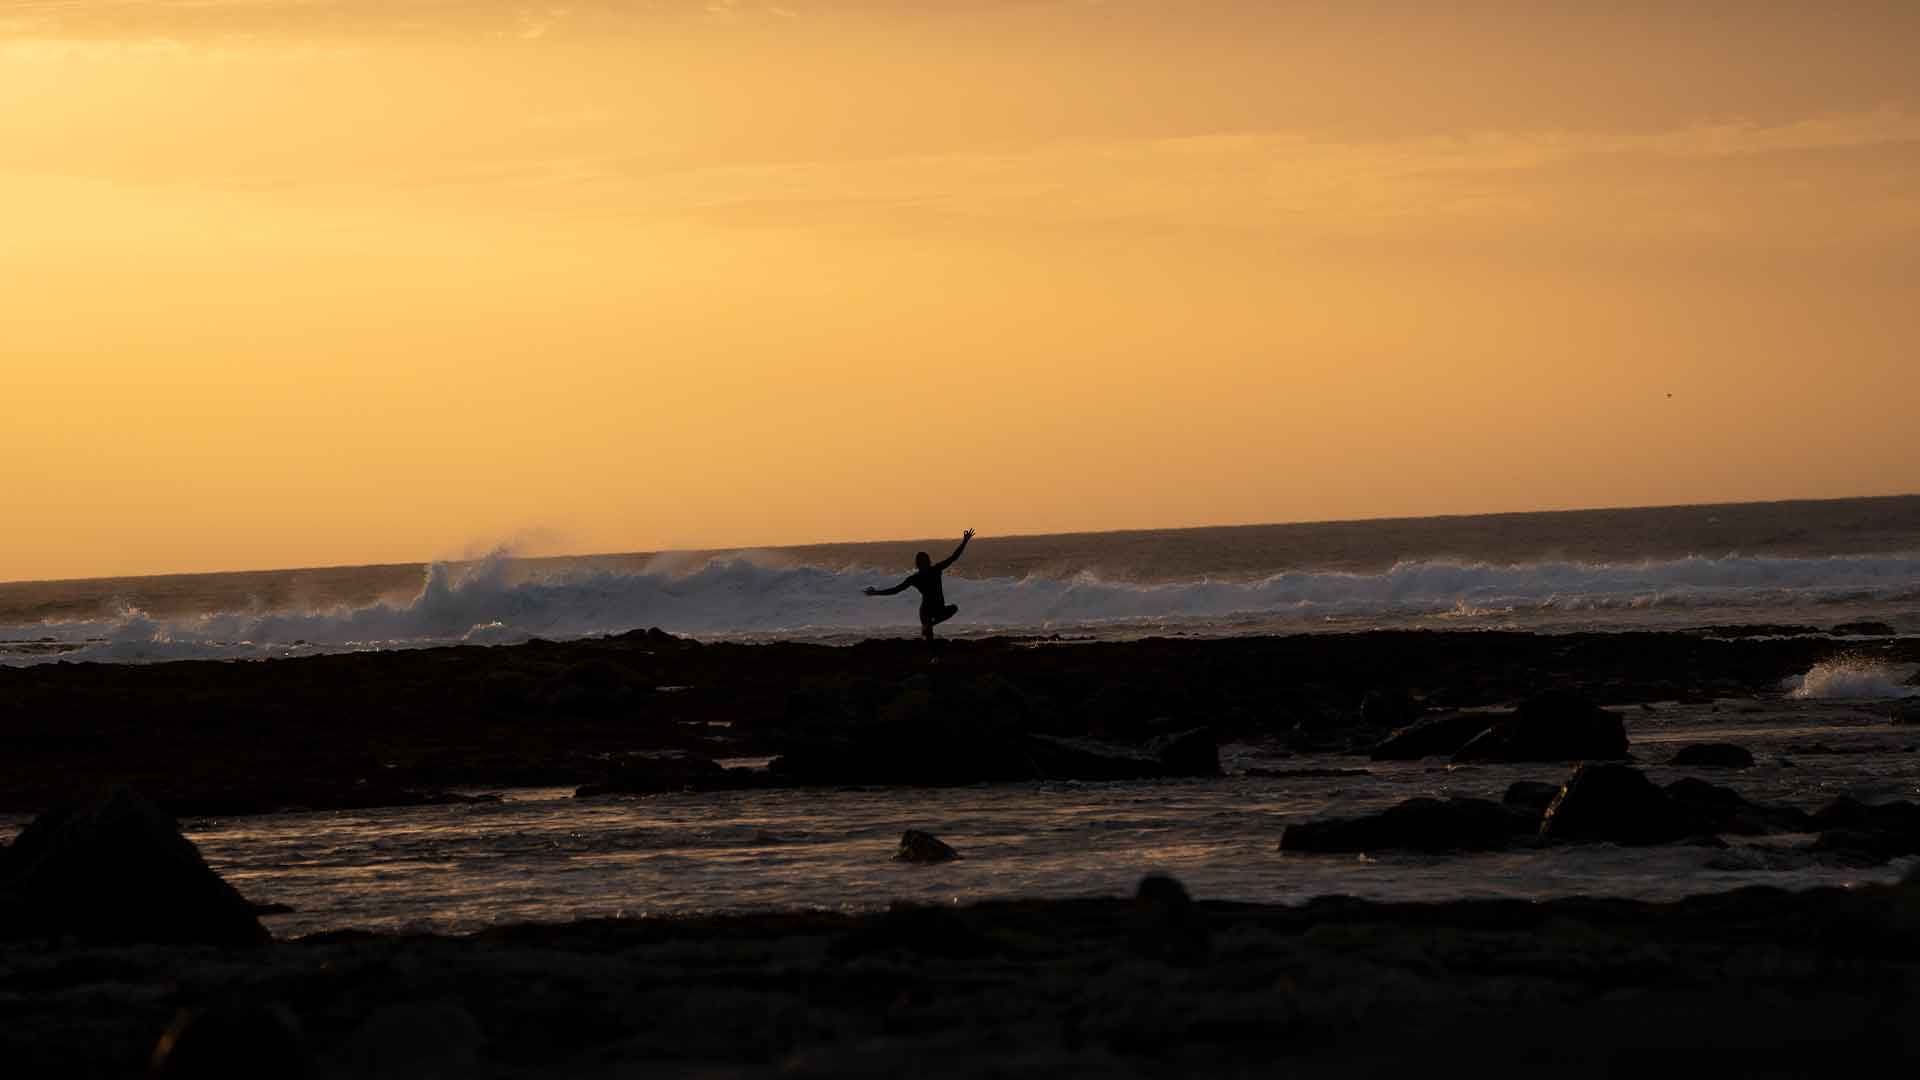 FUERTEVENTURA Canary islands coast, enjoy the coast in the best surfing / kitefurfing trip of your life